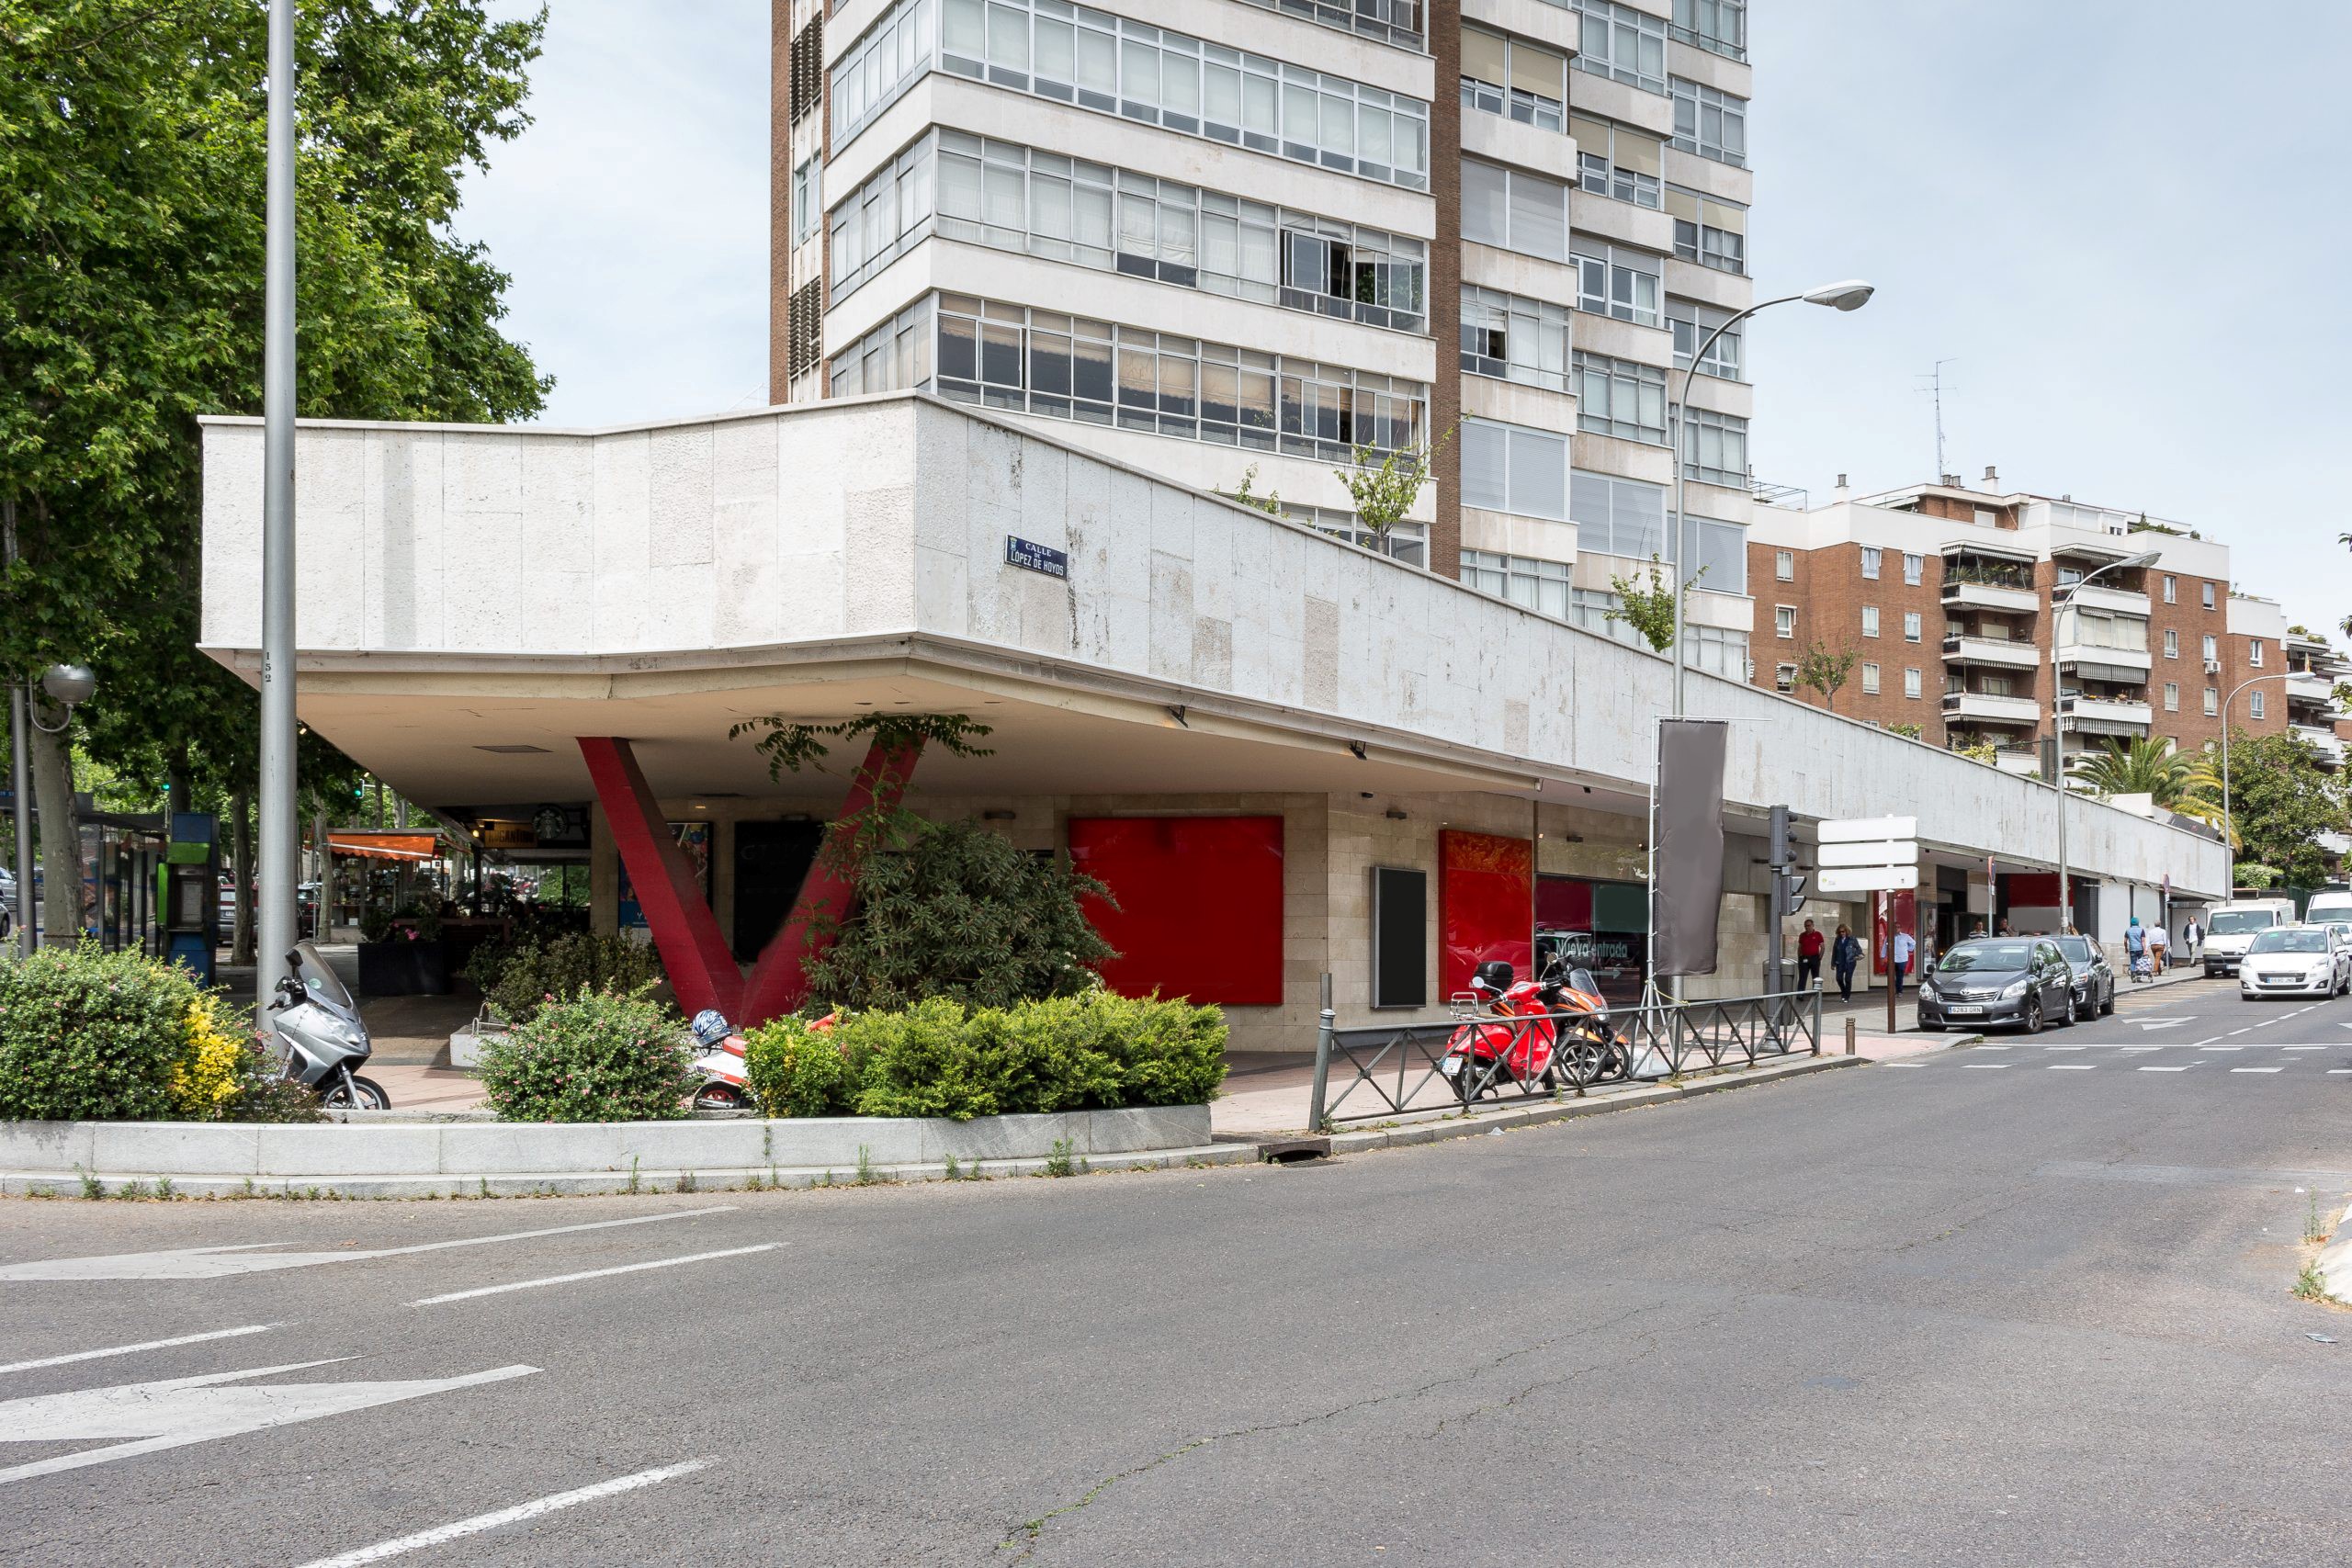 SILICIUS reaches an agreement with Iskaypet Group to open a flagship store in one of its most emblematic premises in Madrid